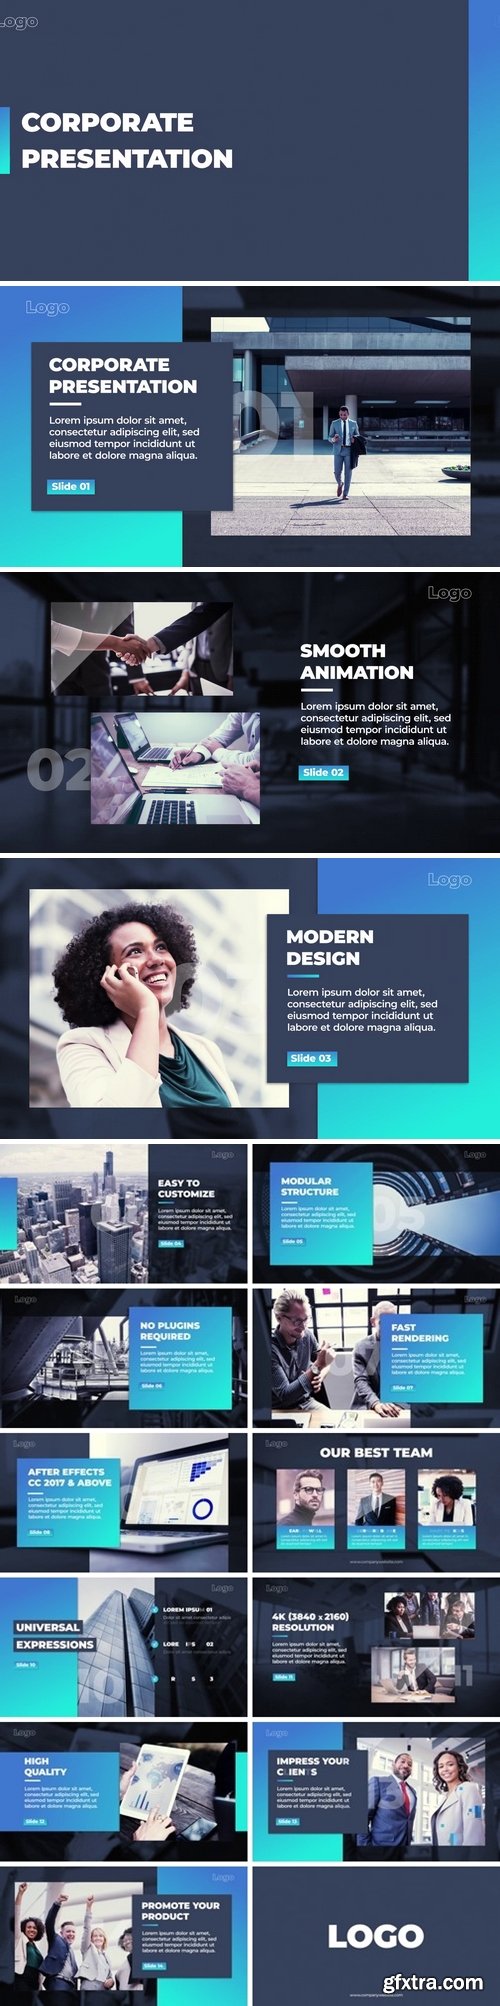 MotionArray - Corporate Presentation After Effects Templates 159461